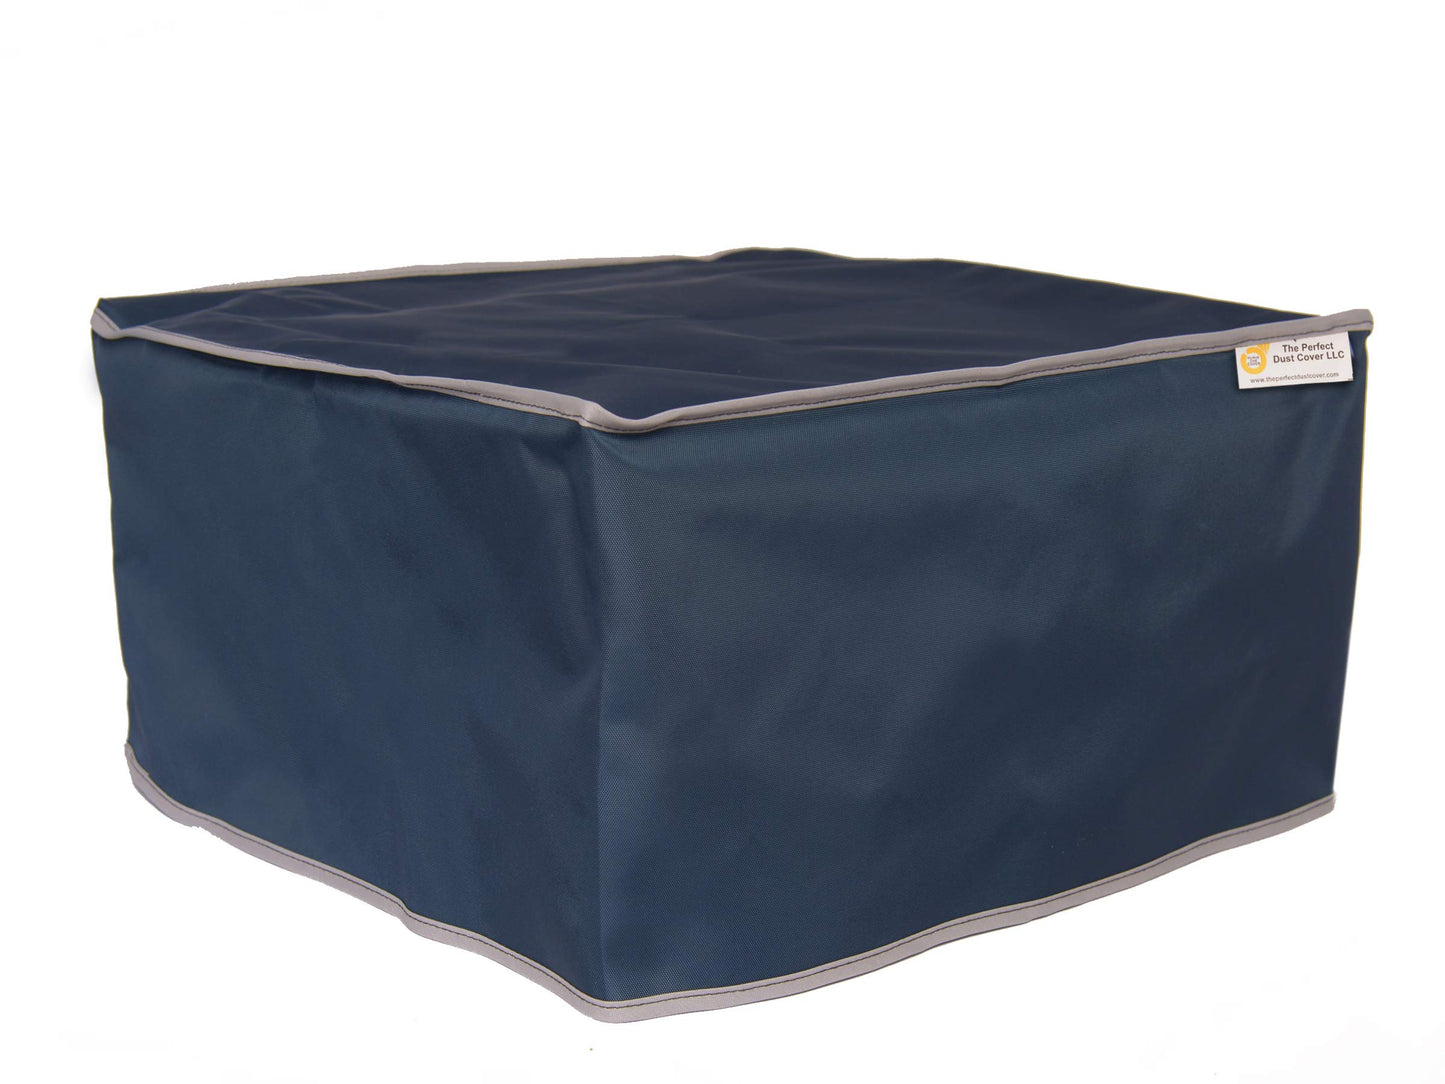 The Perfect Dust Cover, Navy Blue Nylon Cover for Epson SureColor T3475 24'' Large Format Inkjet Printer, Anti Static and Waterproof, Dimensions 43''W x 30''D x 42''H by The Perfect Dust Cover LLC